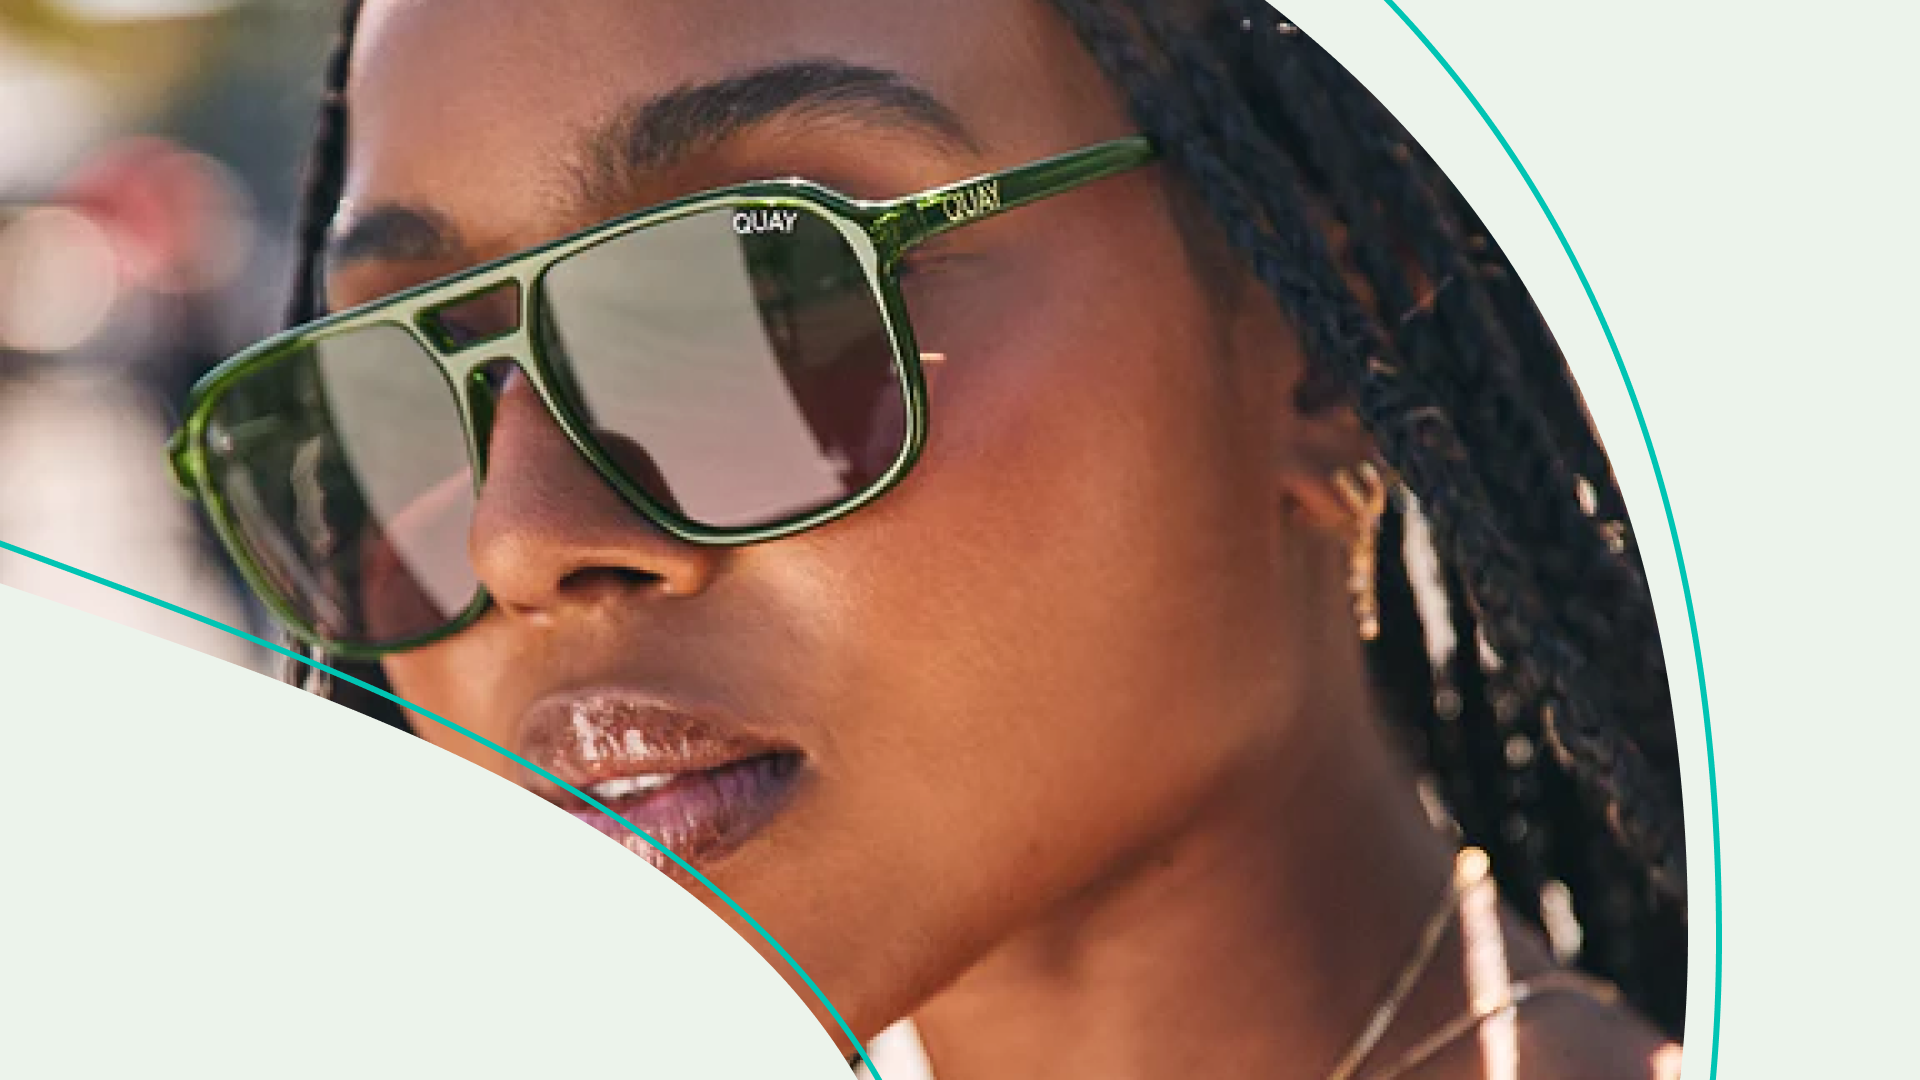 Our Fave Online Brands for Eyeglasses, Sunglasses, and More